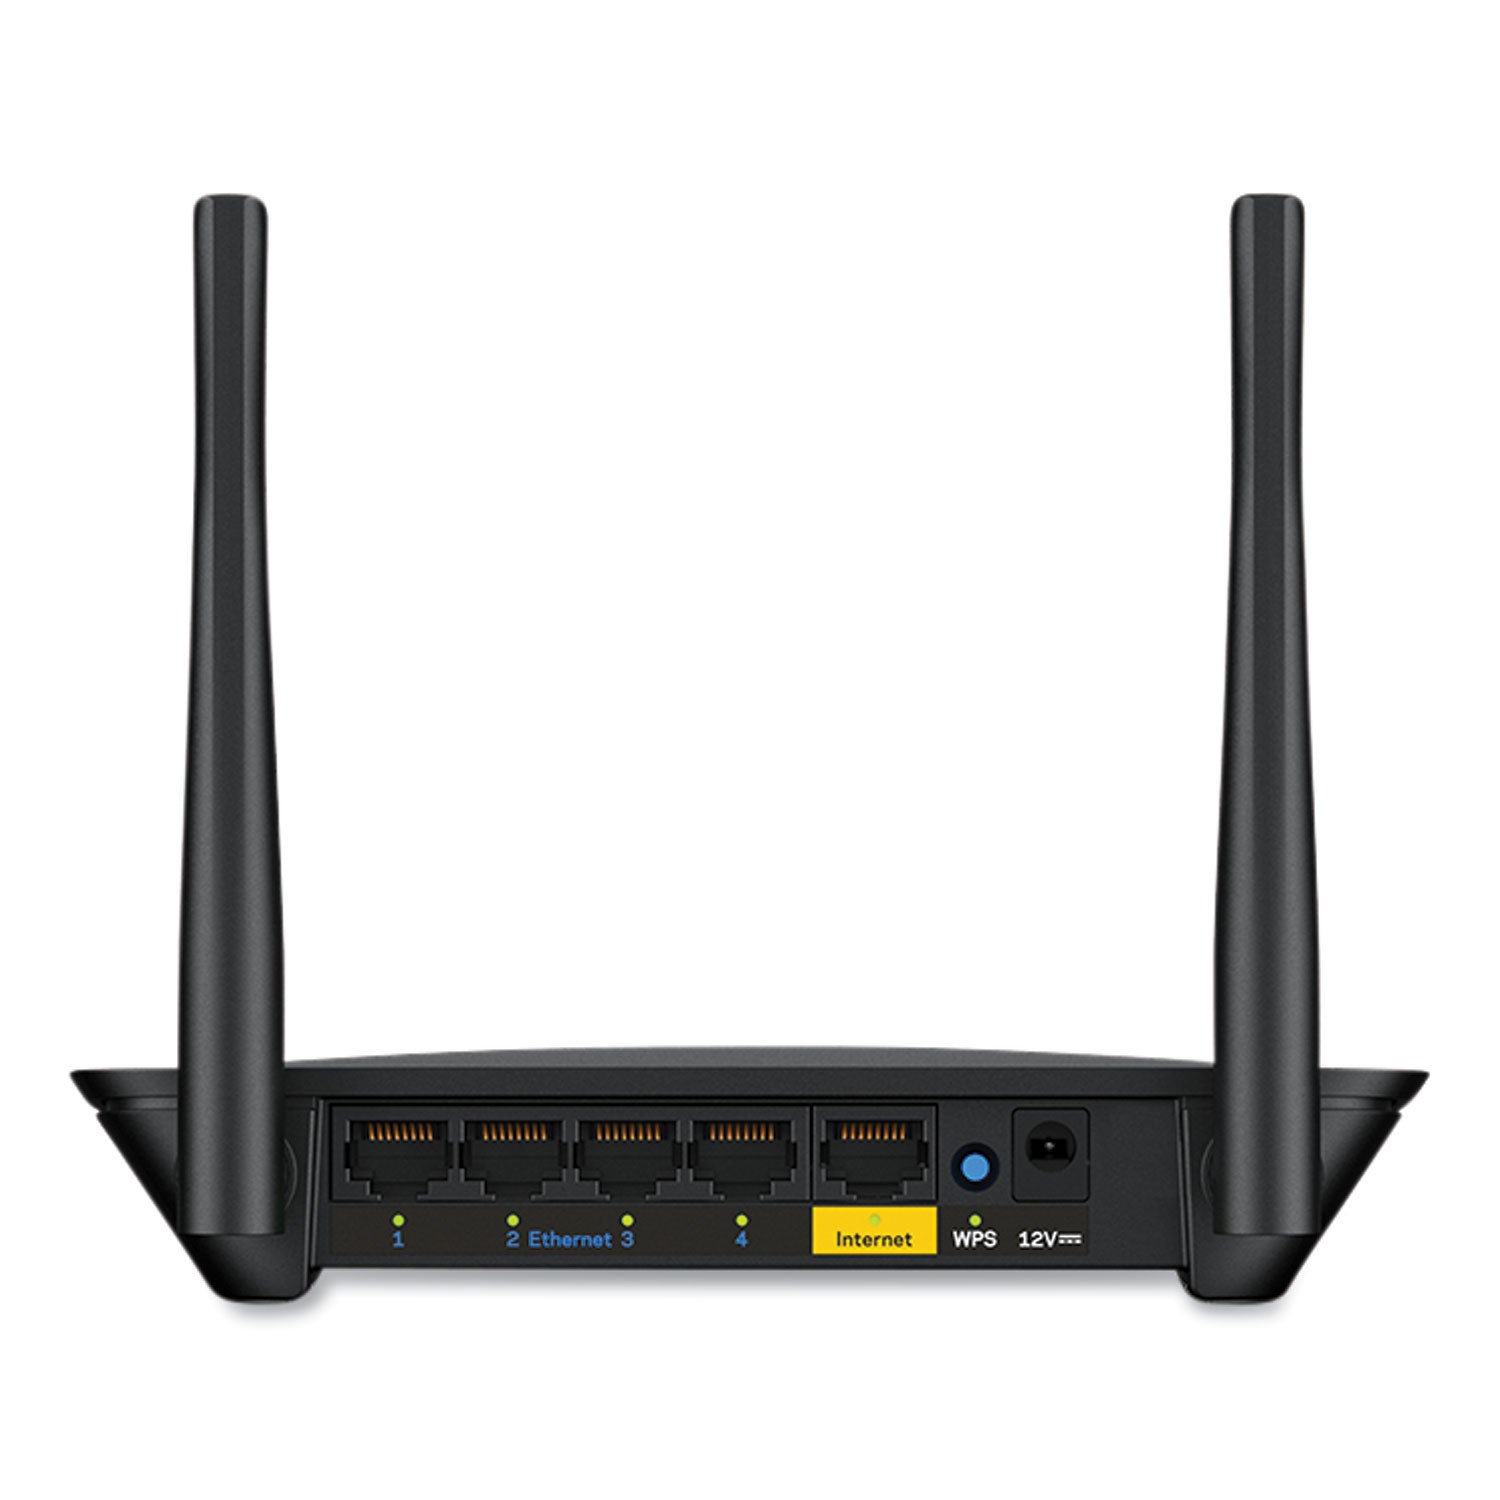 ac1200-wi-fi-router-5-ports-dual-band-24-ghz-5-ghz_lnke5400 - 3